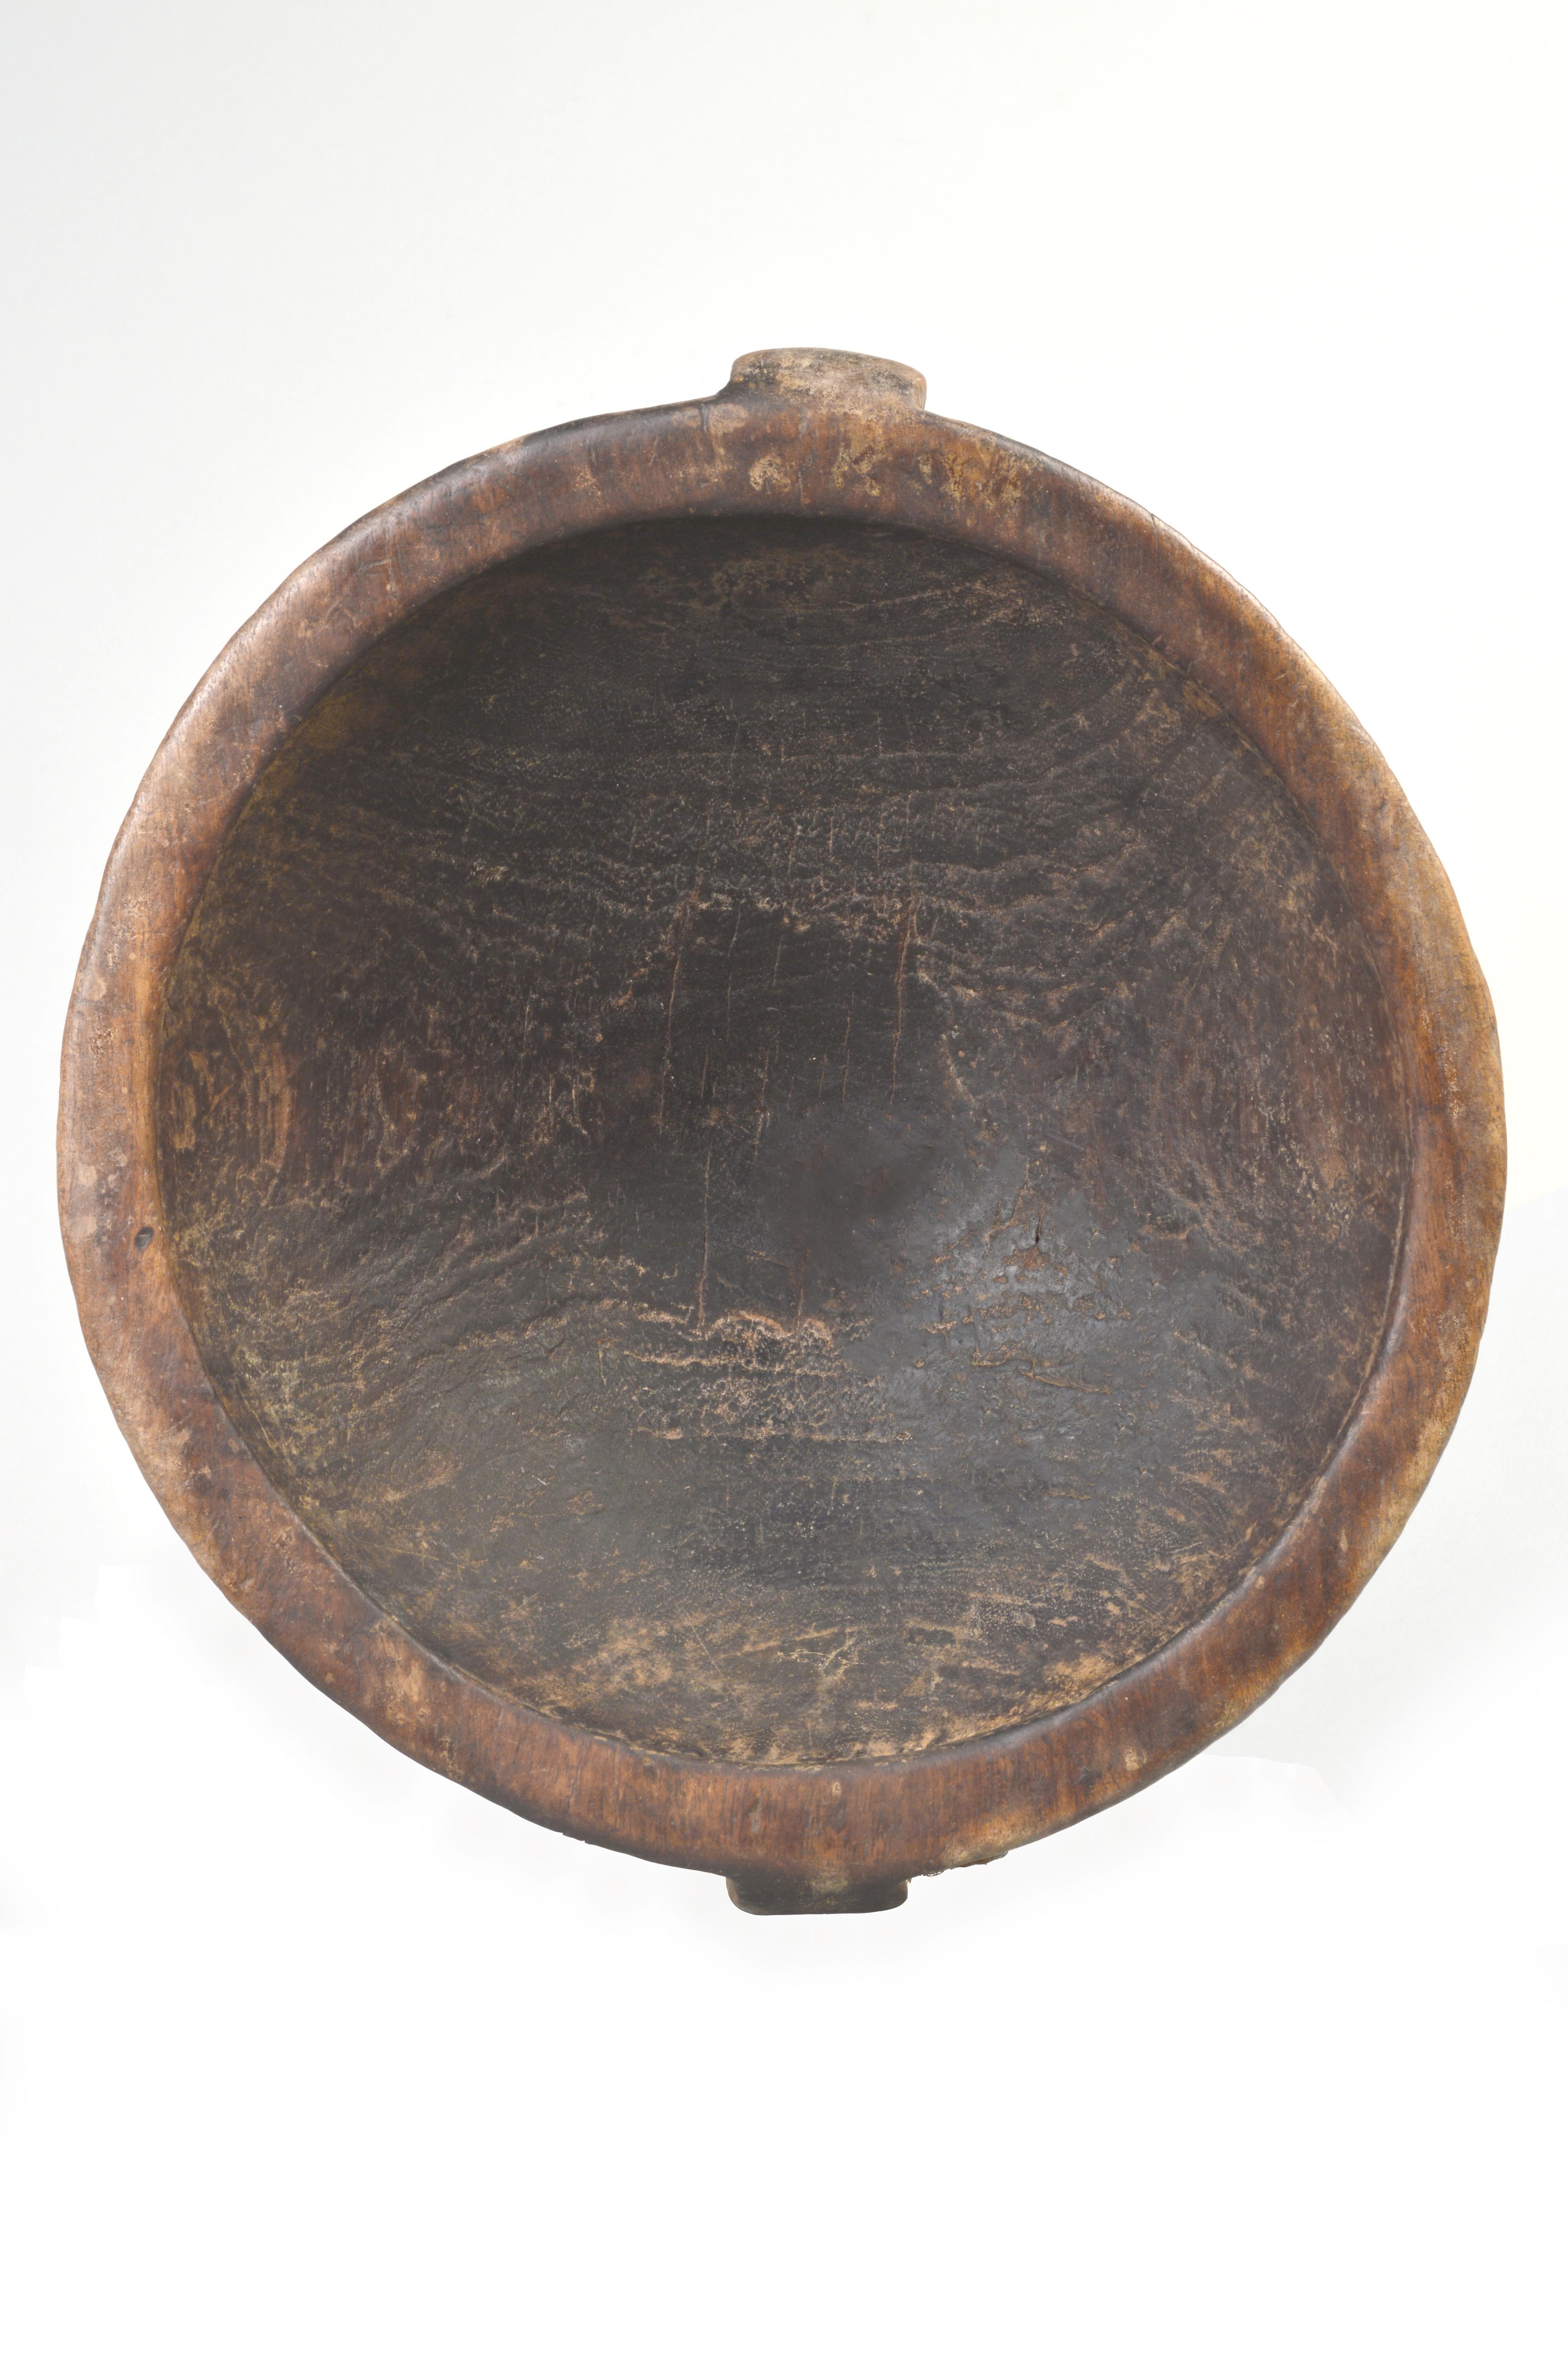 Carved wooden Somali food bowl. Somalis are the predominant ethnic group in Somalia and Djibouti; they also predominate in parts of northeastern Kenya and eastern Ethiopia. Artisans in Somali communities traditionally supplied a great variety of